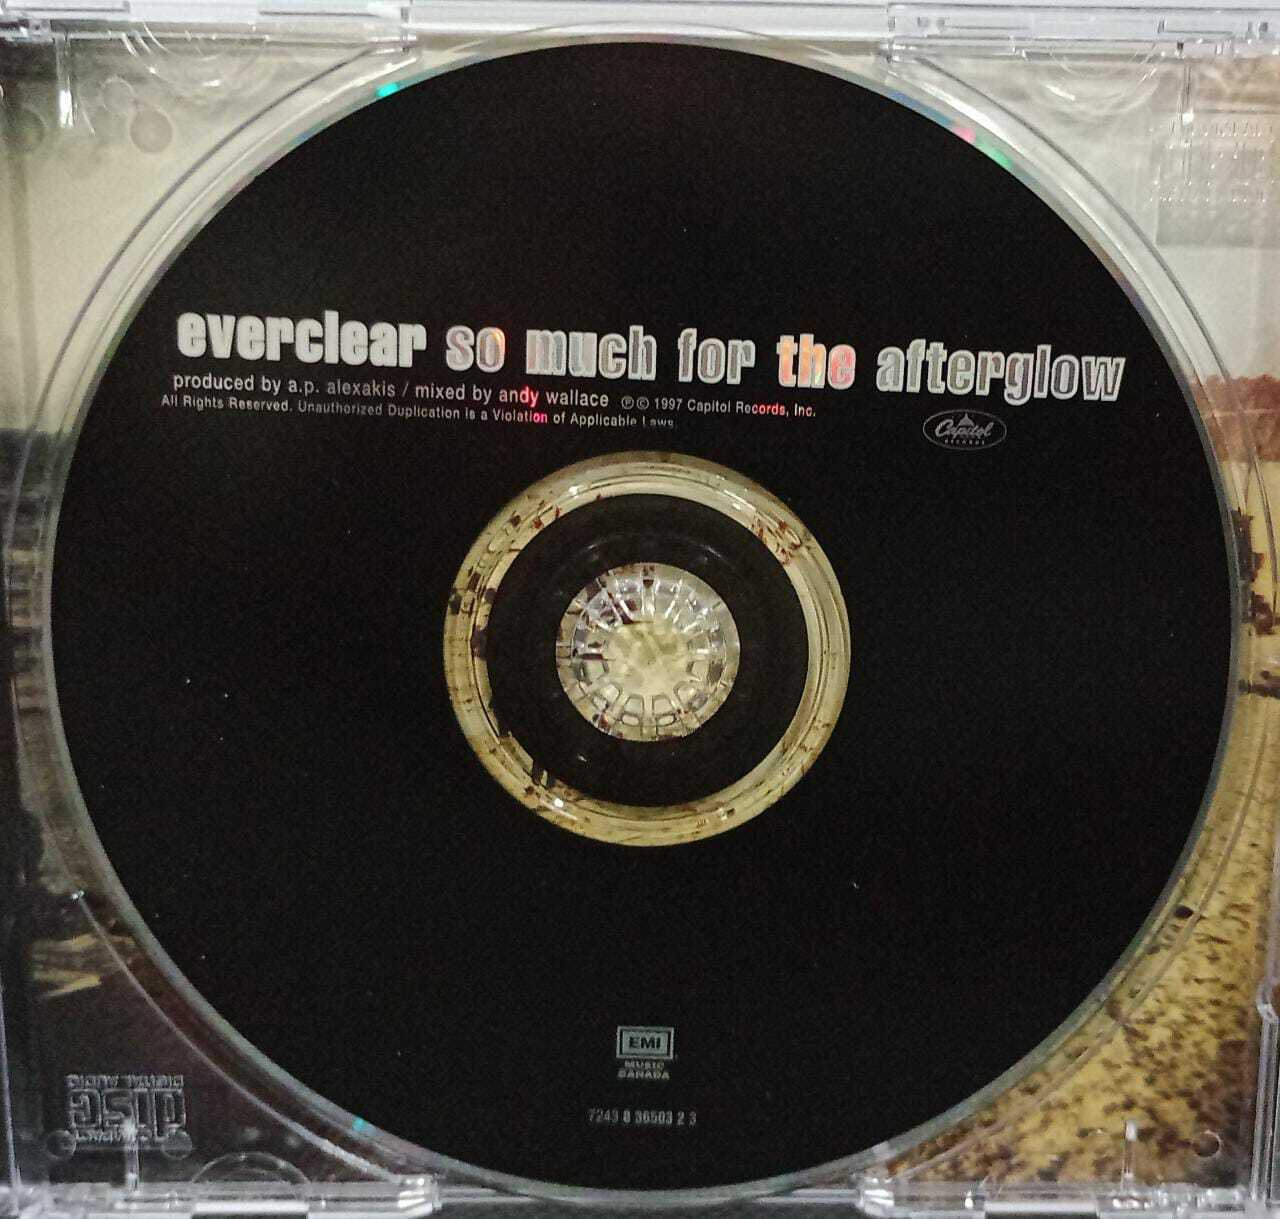 CD - Everclear - So Much For The Afterglow (Canada)